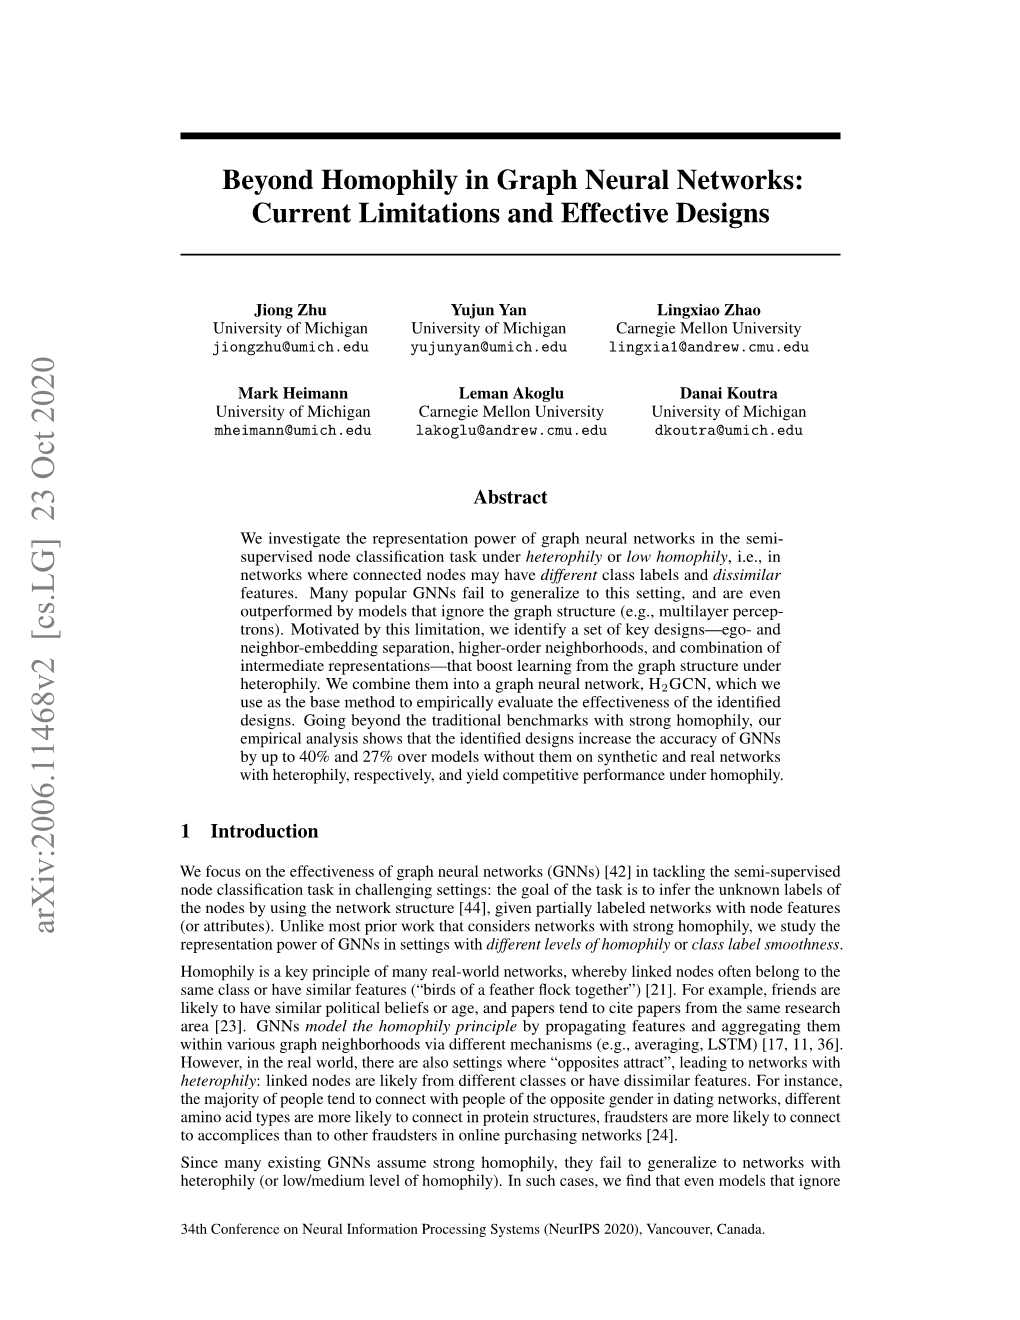 Beyond Homophily in Graph Neural Networks: Current Limitations and Effective Designs